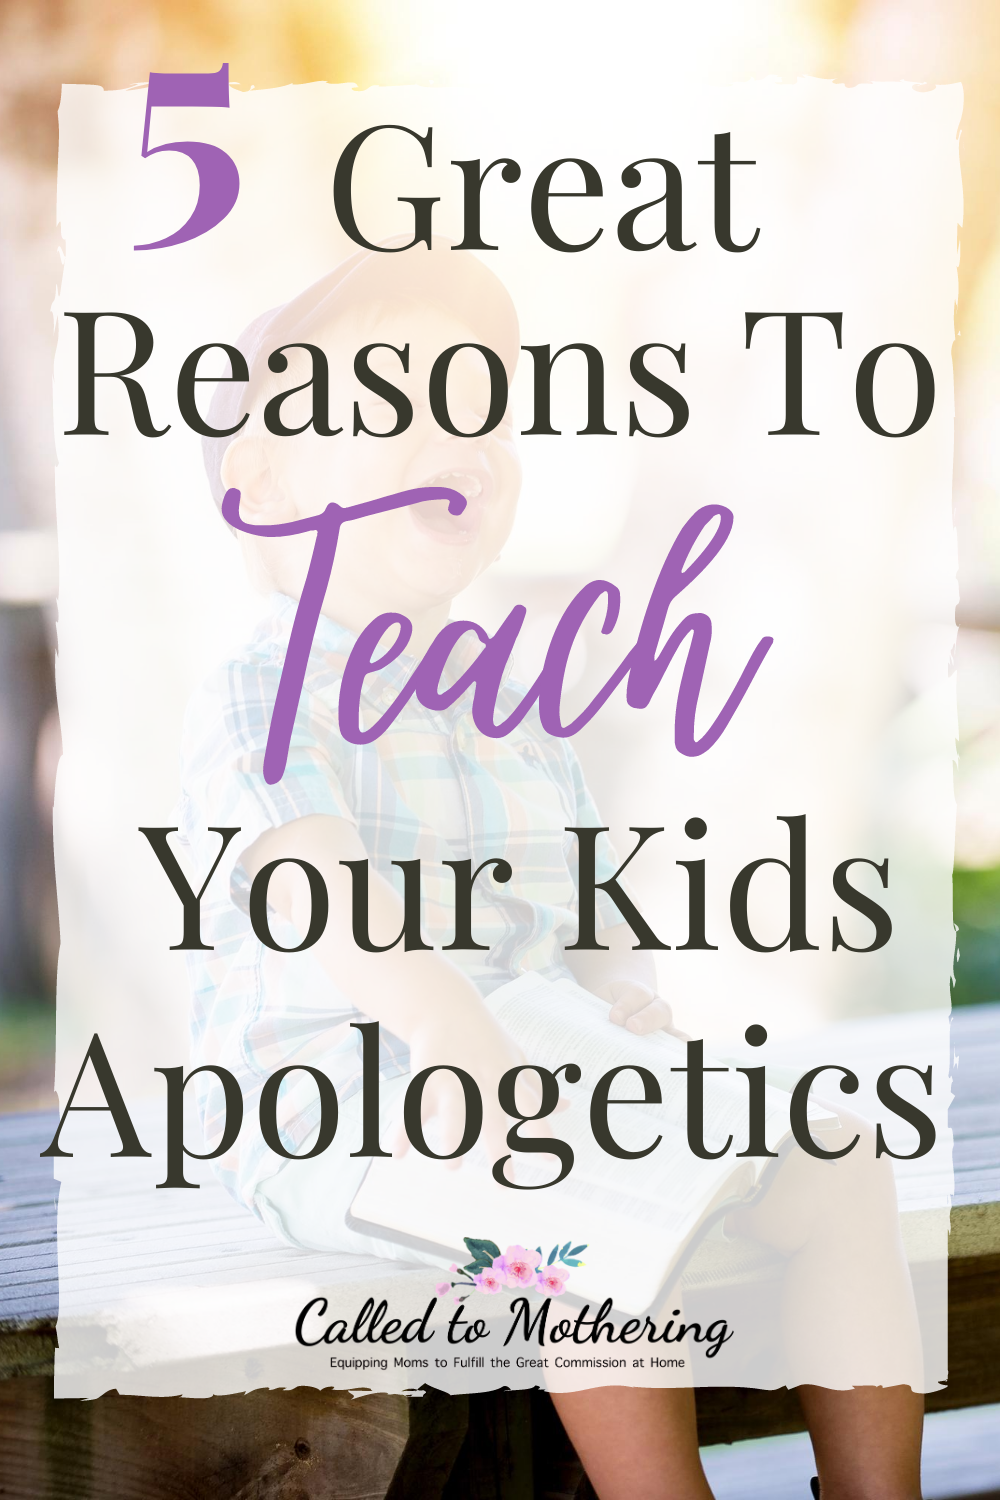 Five great reasons to teach your kids how to defend their Christian faith through apologetics. #youthapologetics #kidsfaith #raisinggodlykids #teachingkidsthebible